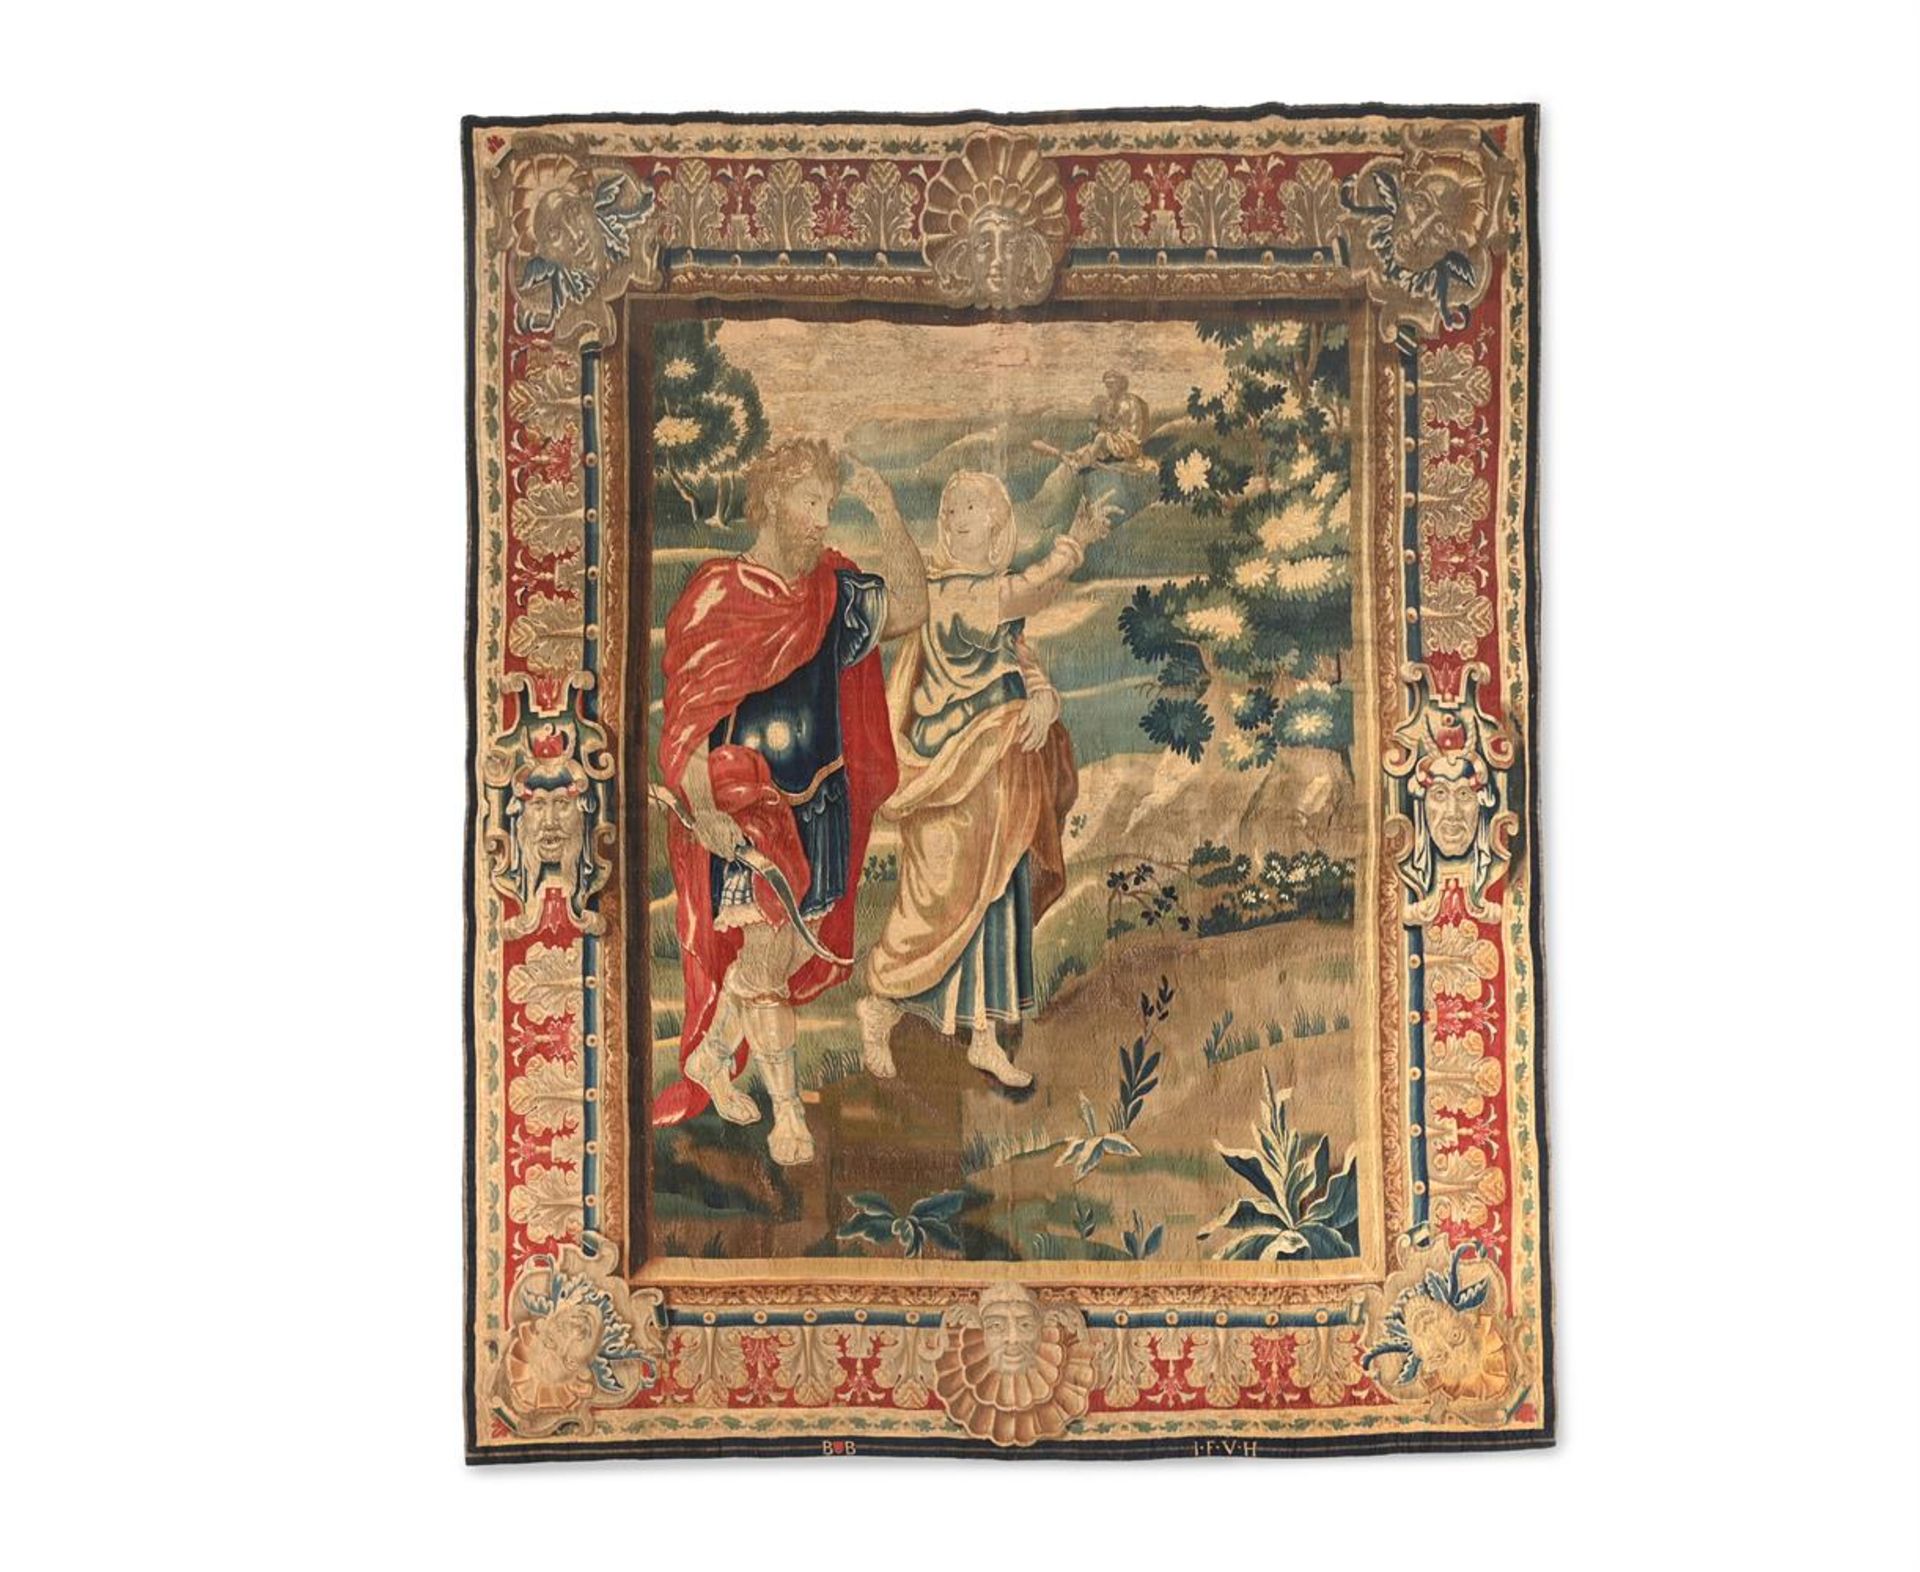 A FLEMISH TAPESTRY PROBABLY DEPICTING DIDO AND AENEAS BRUSSELS, LATE 17TH/EARLY 18TH CENTURY